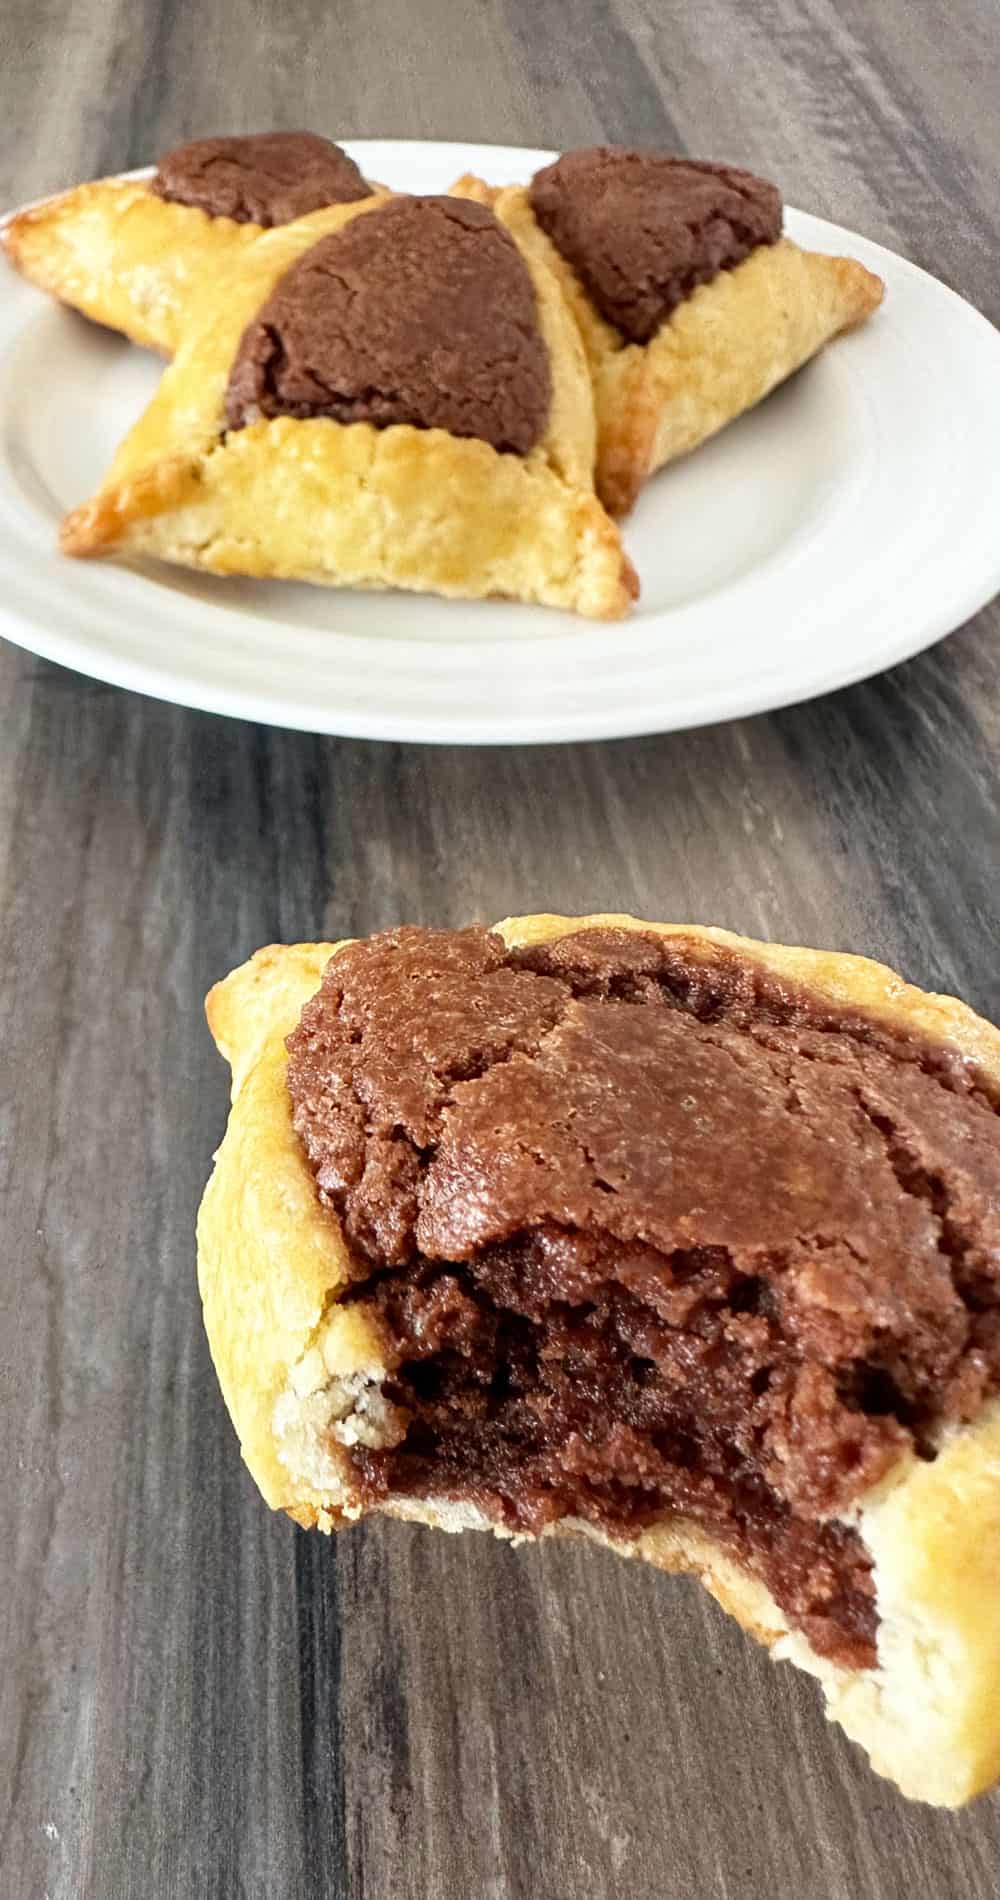 Piece of Nutella Hamantaschen in front of a plate of hamantaschen